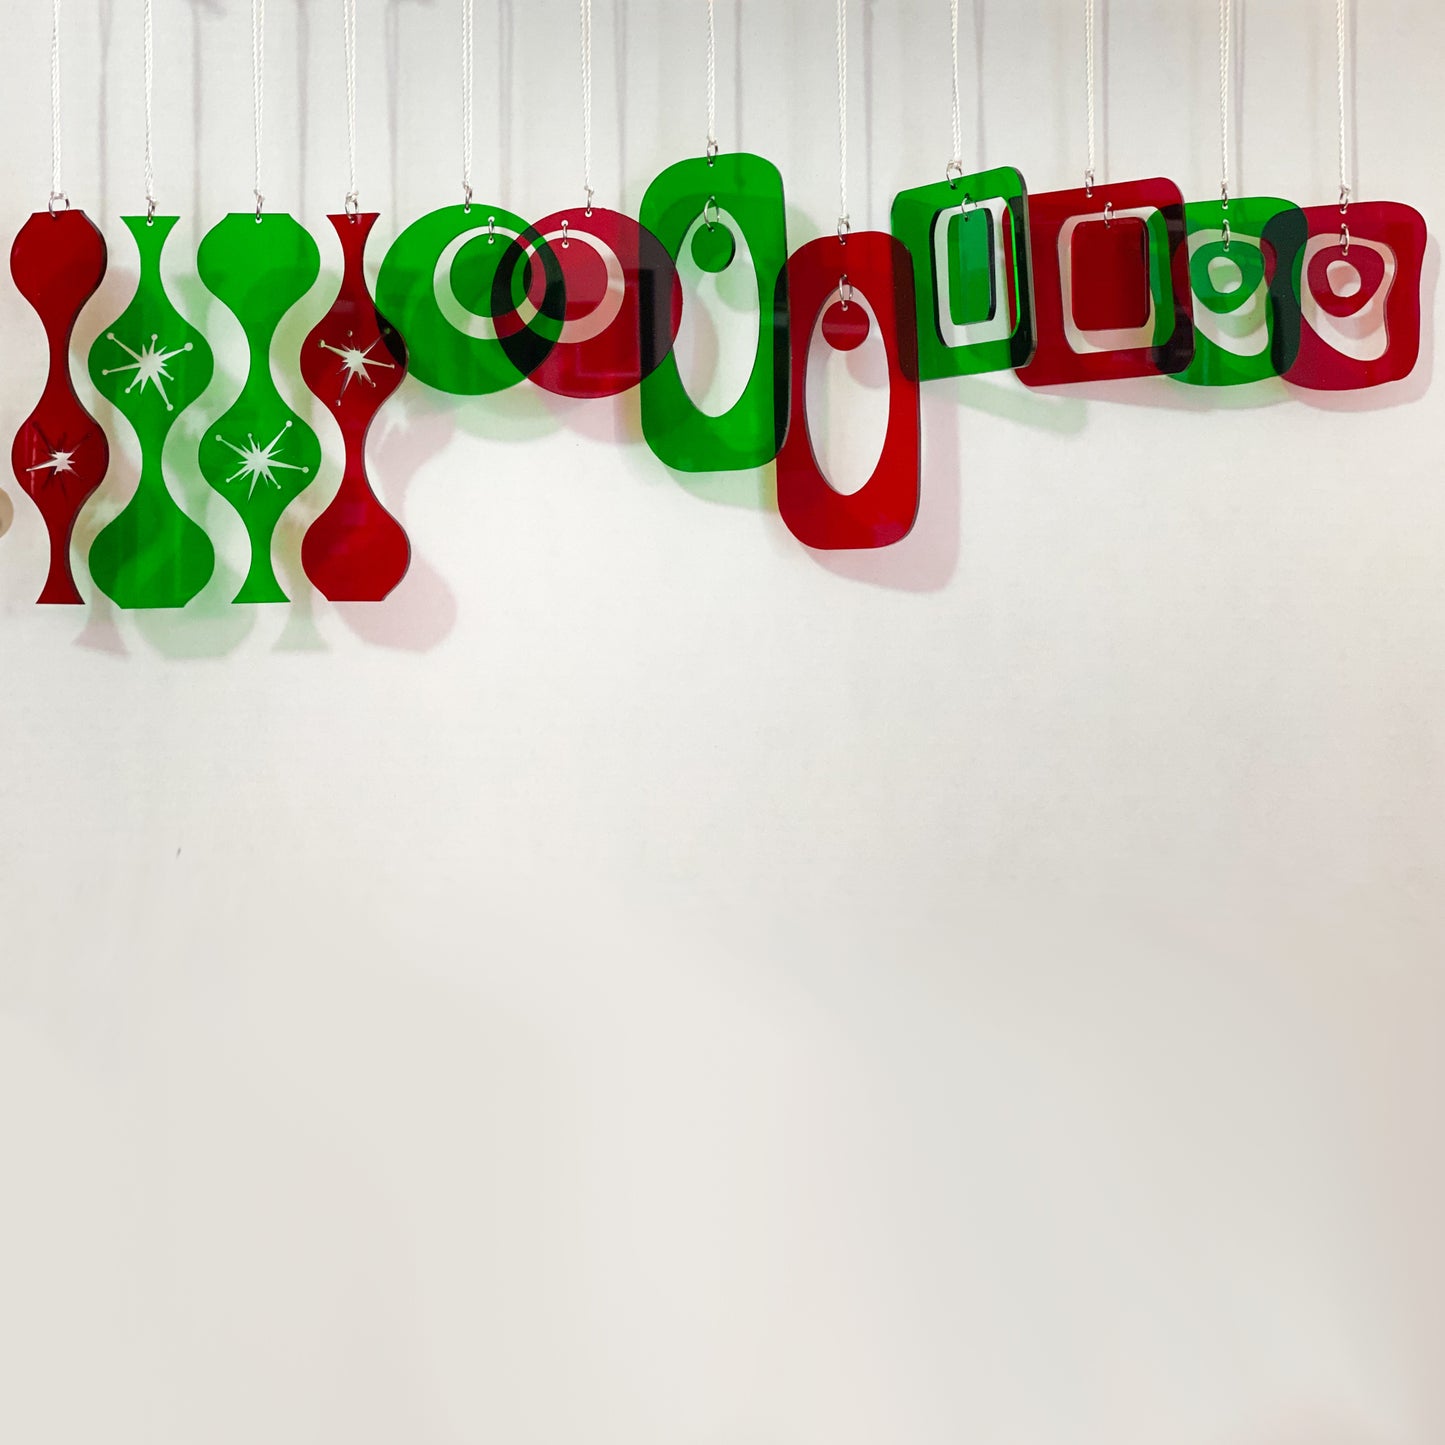 12 Sets of gorgeous transparent red and green mid century modern style Christmas Ornaments for your Christmas tree by AtomicMobiles.com